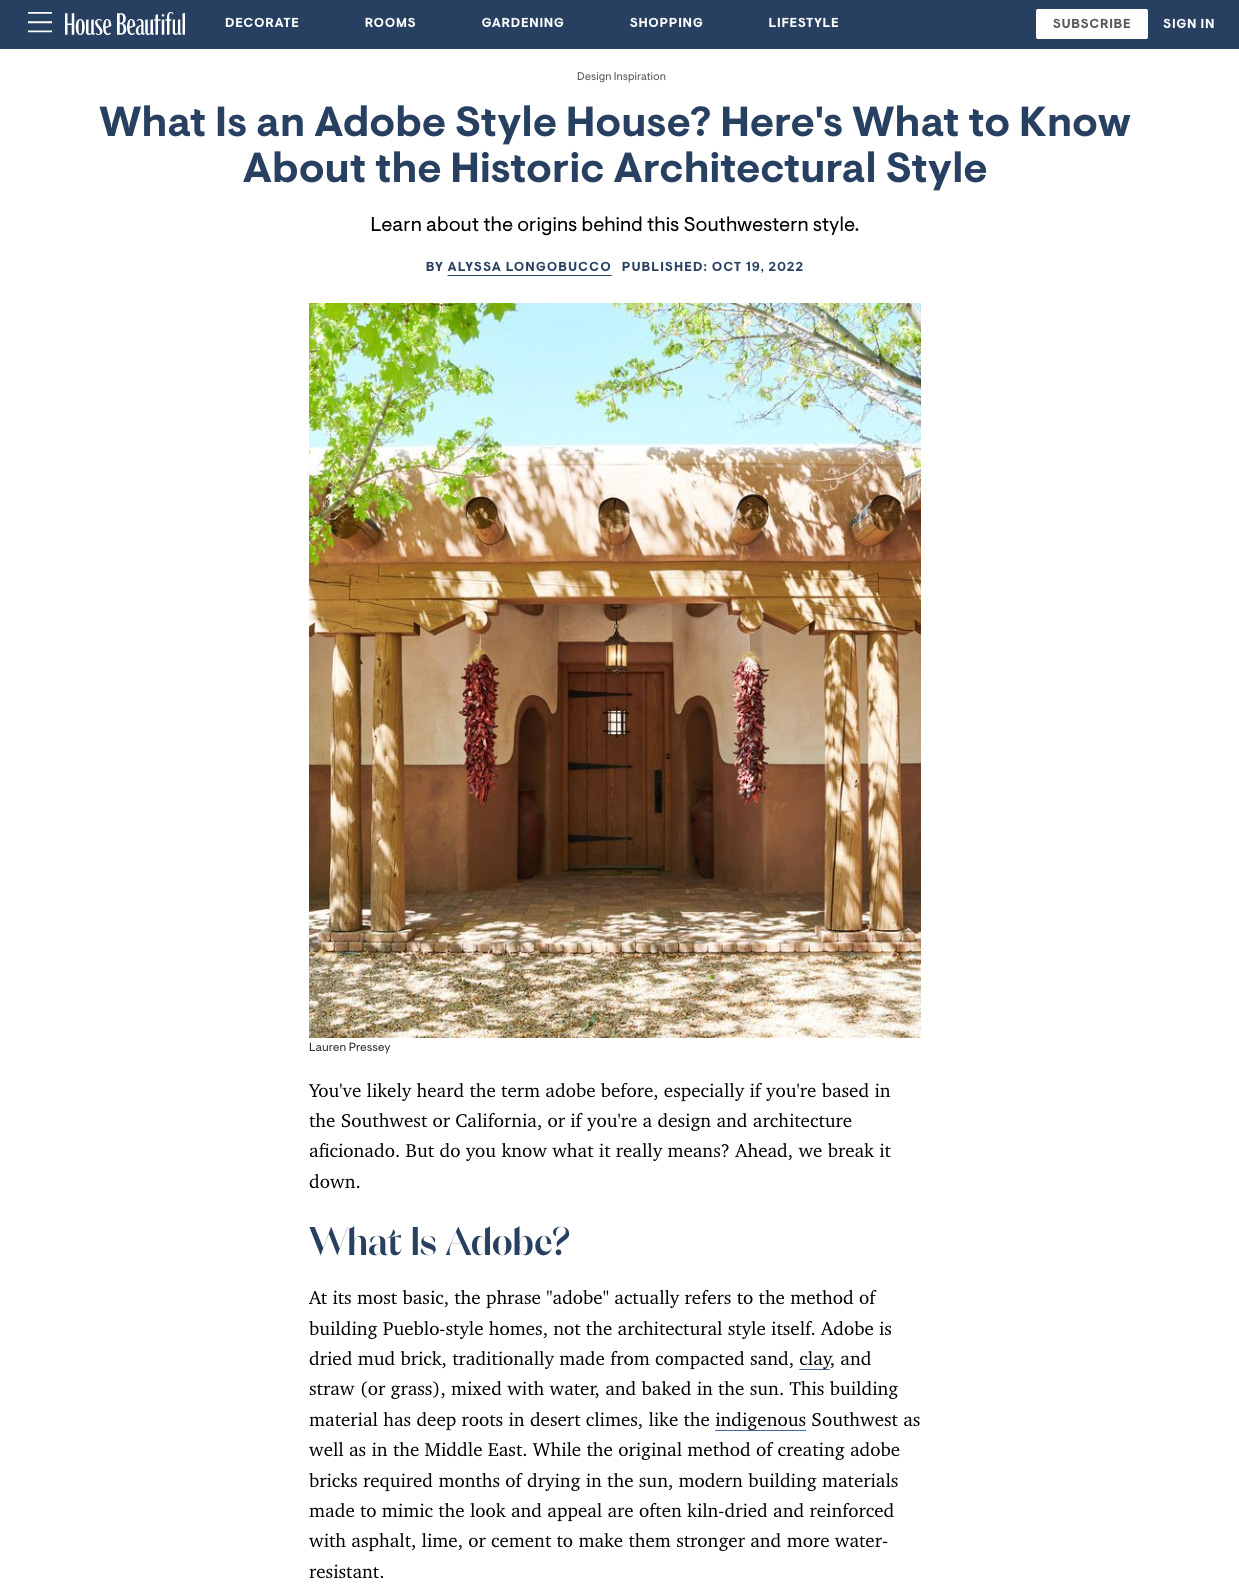 This historic architectural Adobe style house building's material has deep roots in desert climes, like the indigenous Southwest as well as in the Middle East.